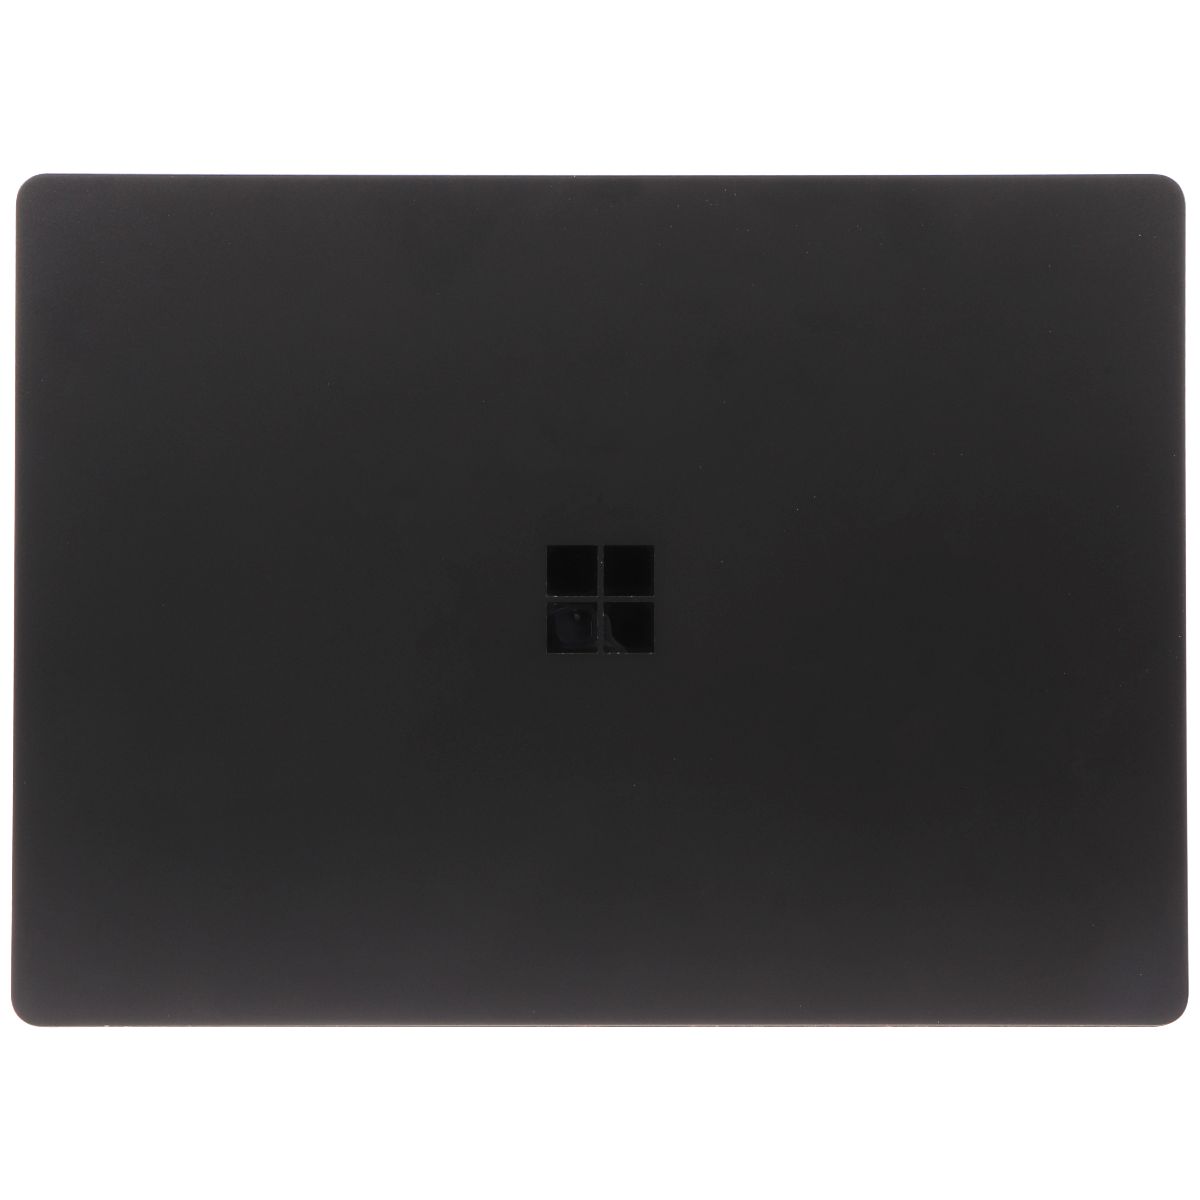 Microsoft Surface Laptop 4 (13.5-in) 1951 (i5-1135G7 / 512GB SSD / 8GB) - Black Laptops - PC Laptops & Netbooks Microsoft    - Simple Cell Bulk Wholesale Pricing - USA Seller